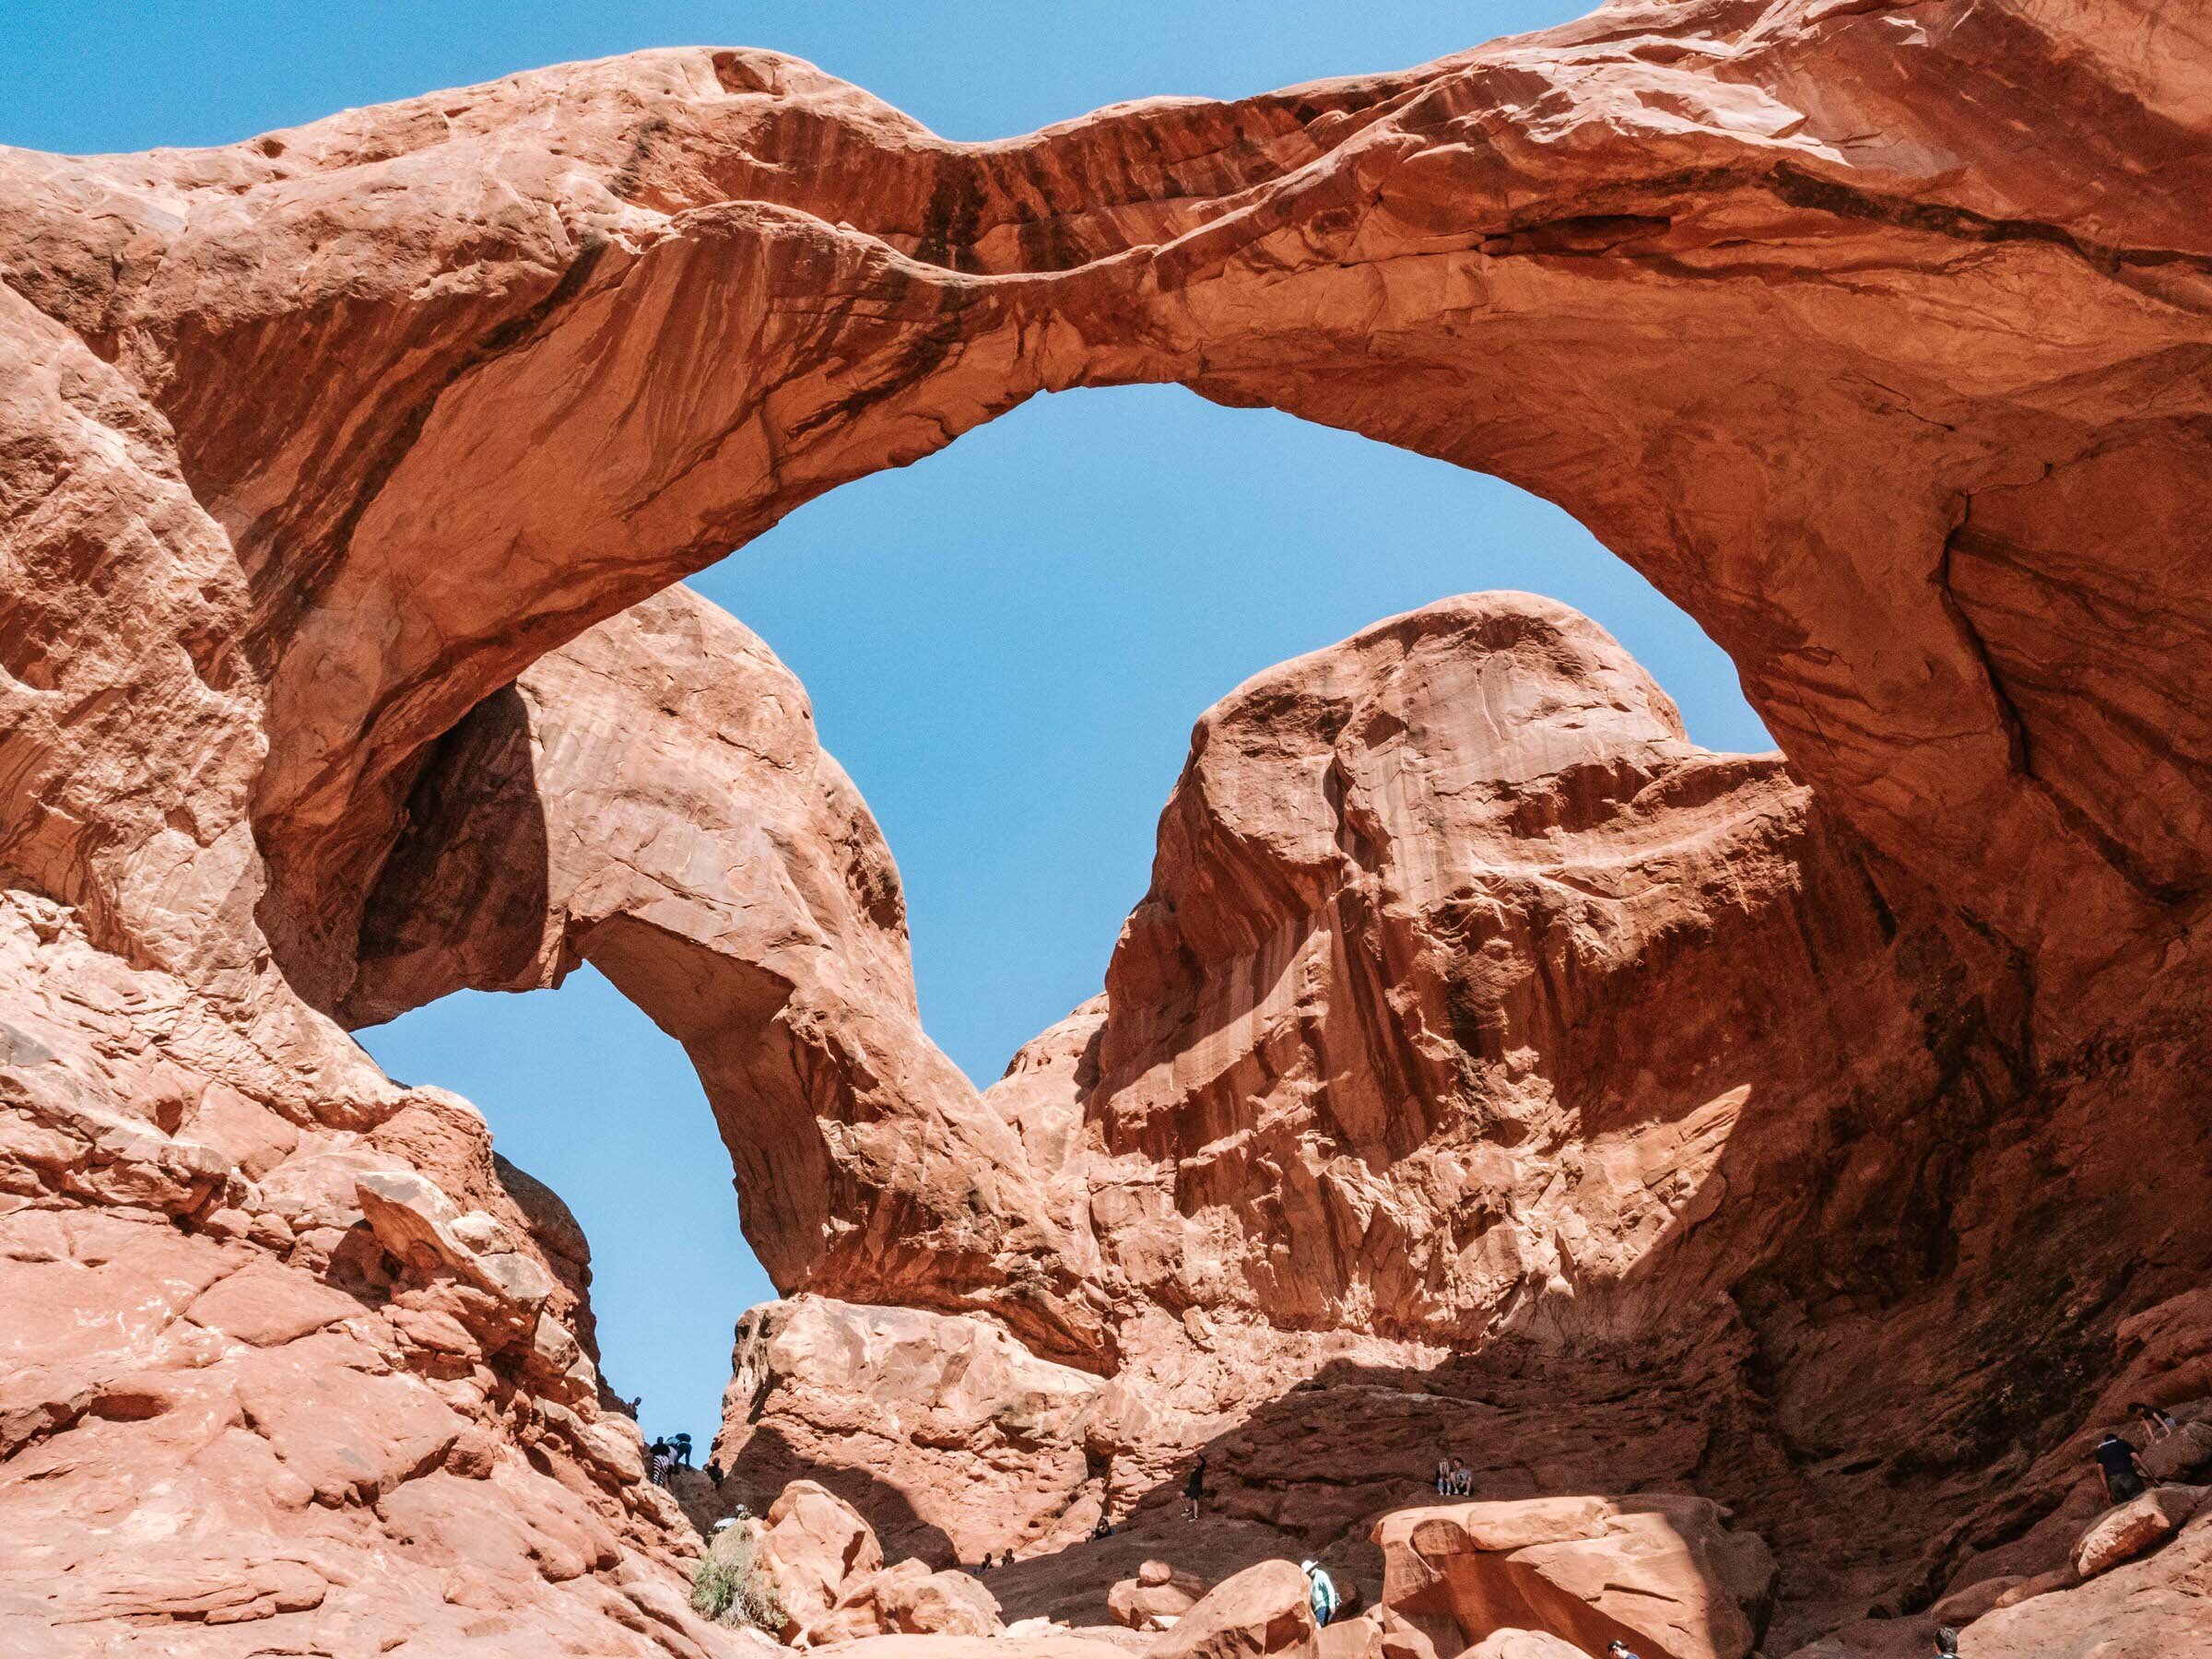 close-up+view+of+double+arch+in+arches+national+park.jpeg